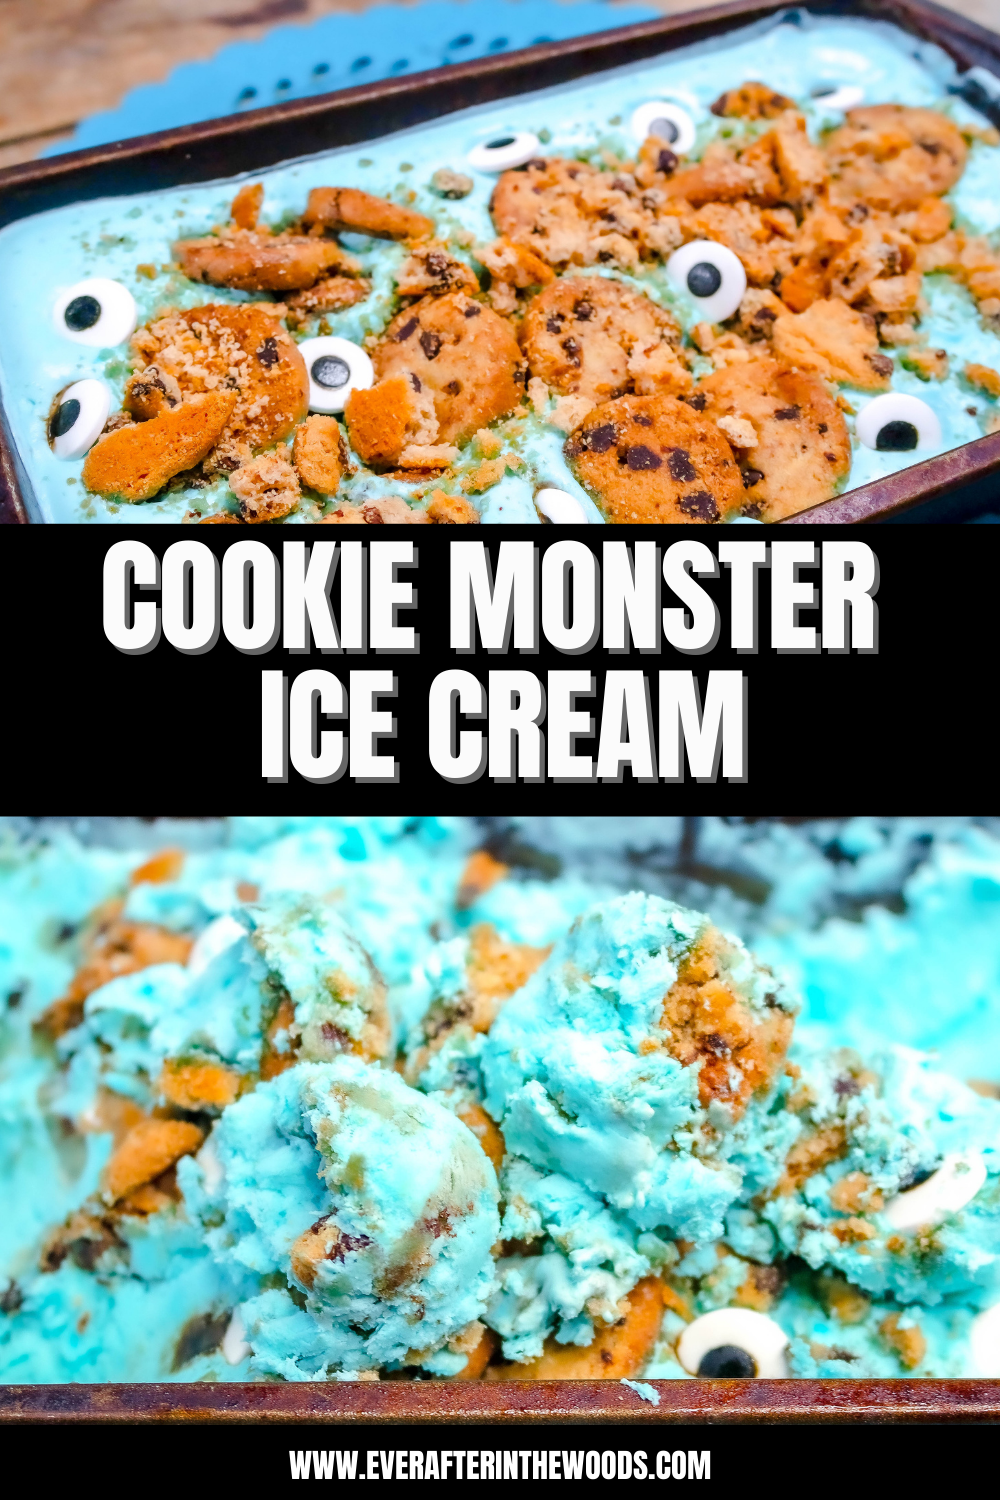 how to make cookie monster ice cream